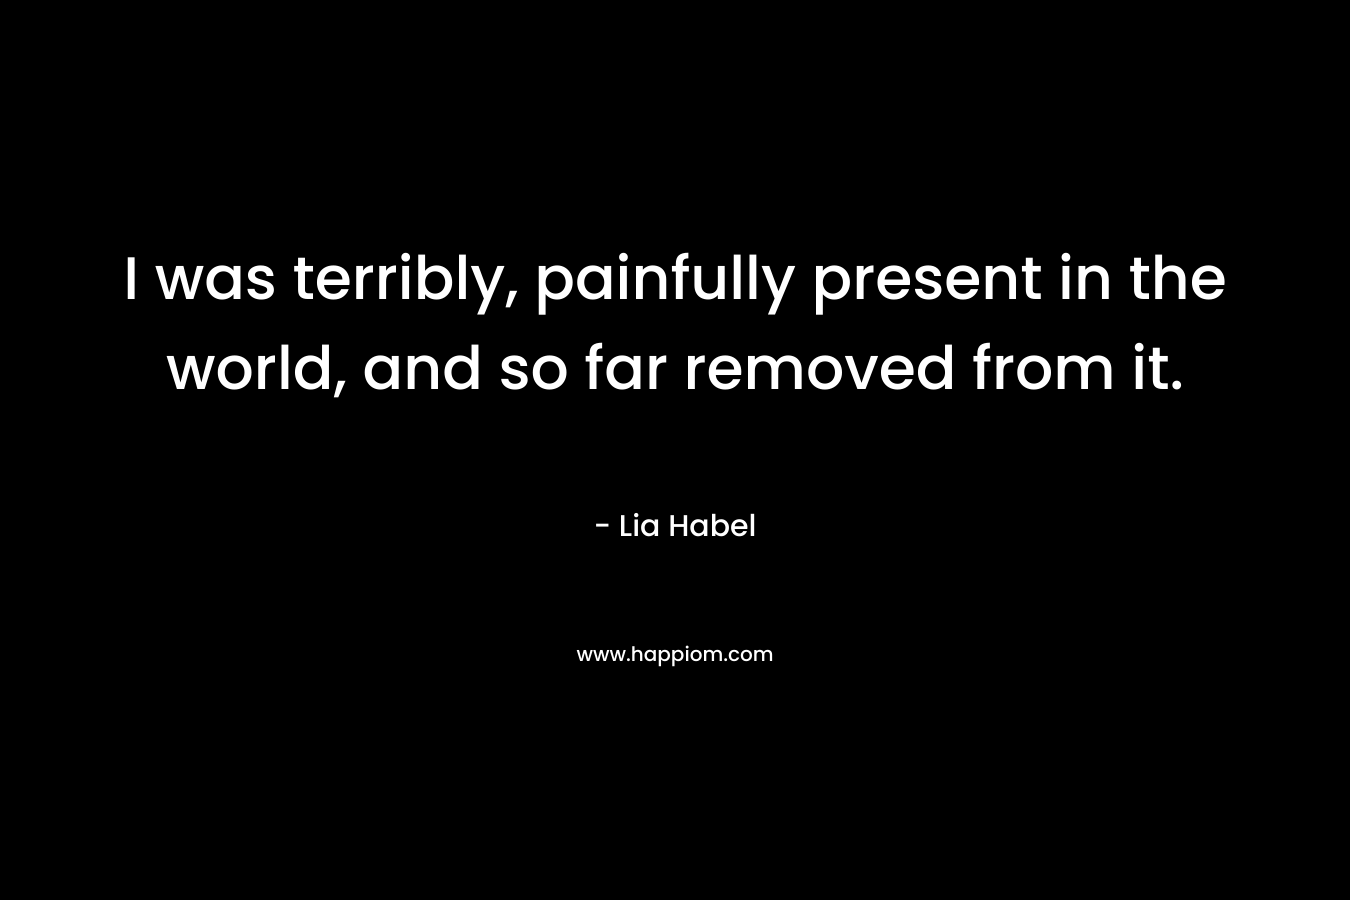 I was terribly, painfully present in the world, and so far removed from it. – Lia Habel